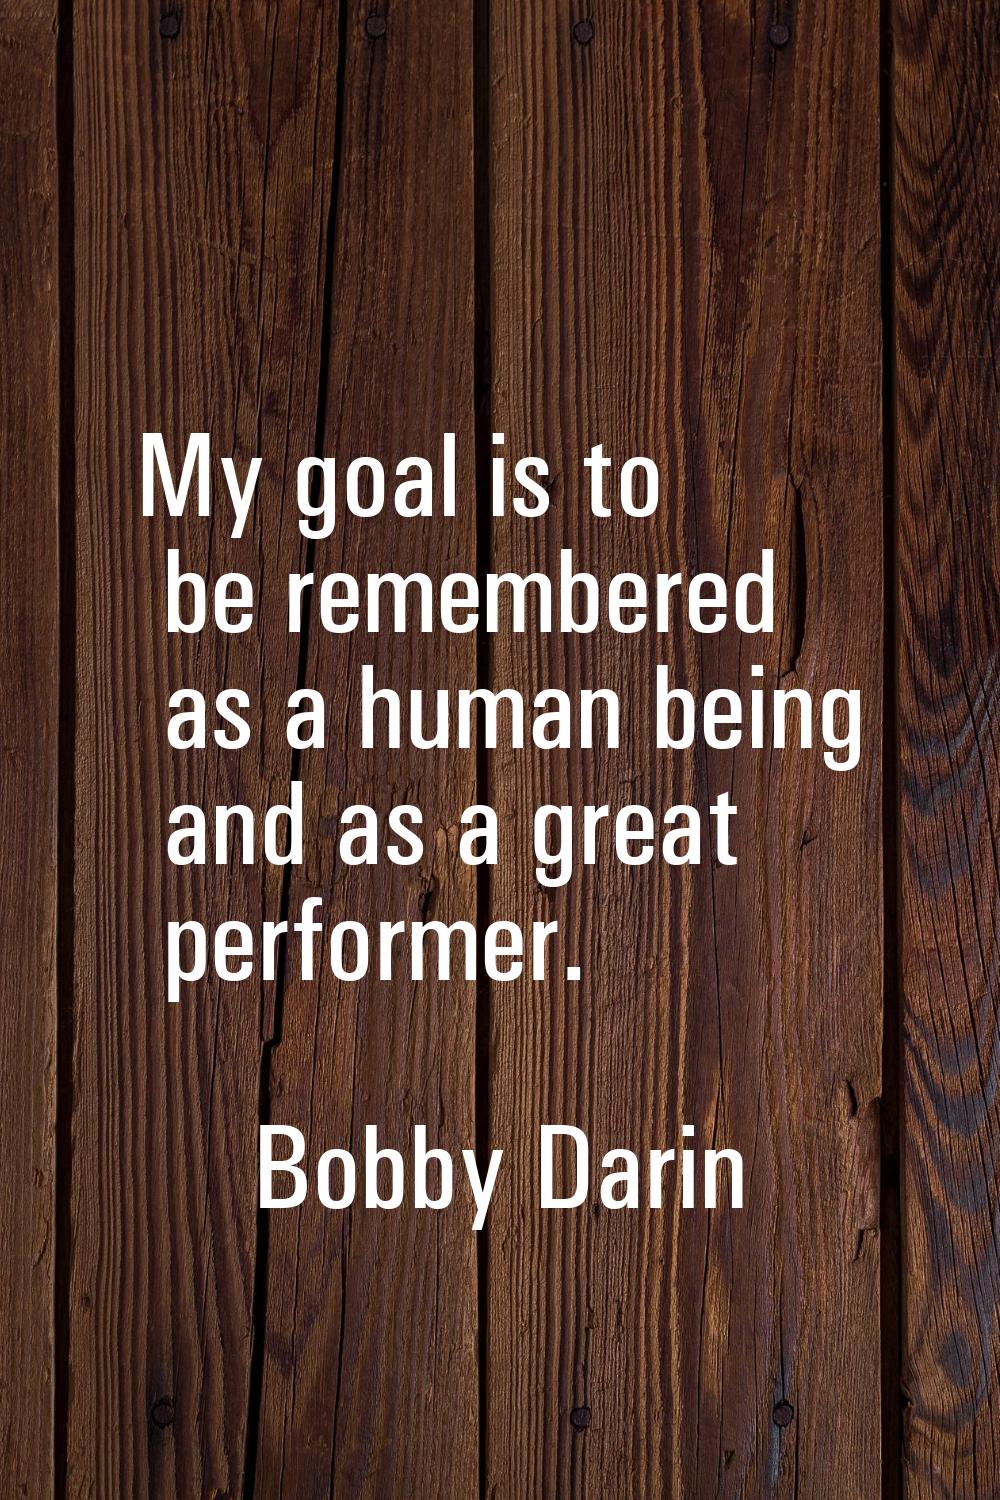 My goal is to be remembered as a human being and as a great performer.